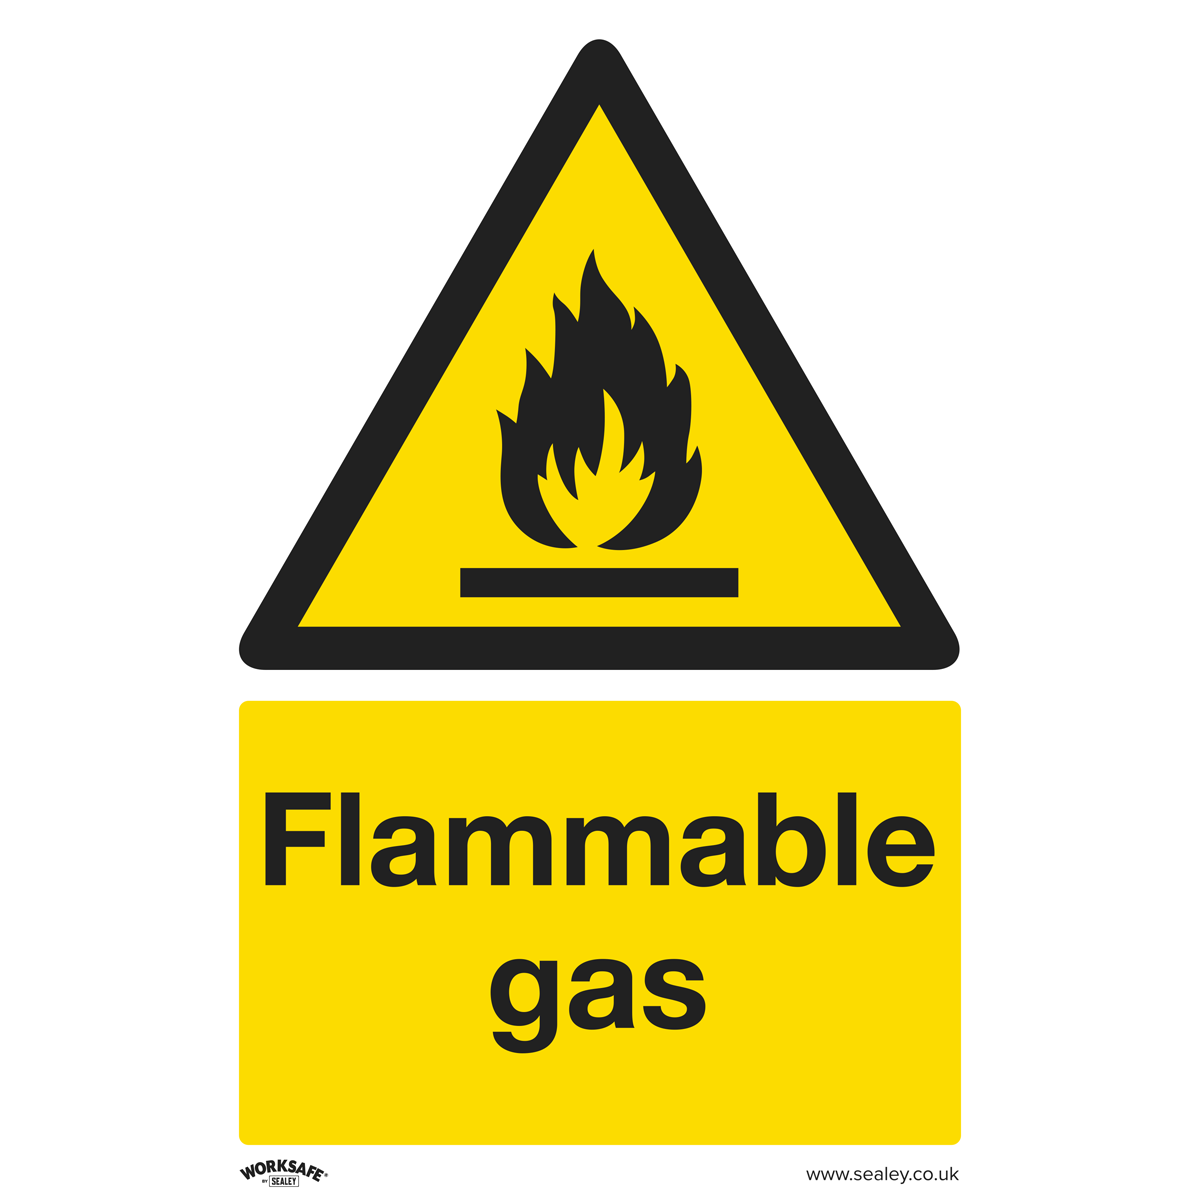 Warning Safety Sign - Flammable Gas - Rigid Plastic - SS59P1 - Farming Parts